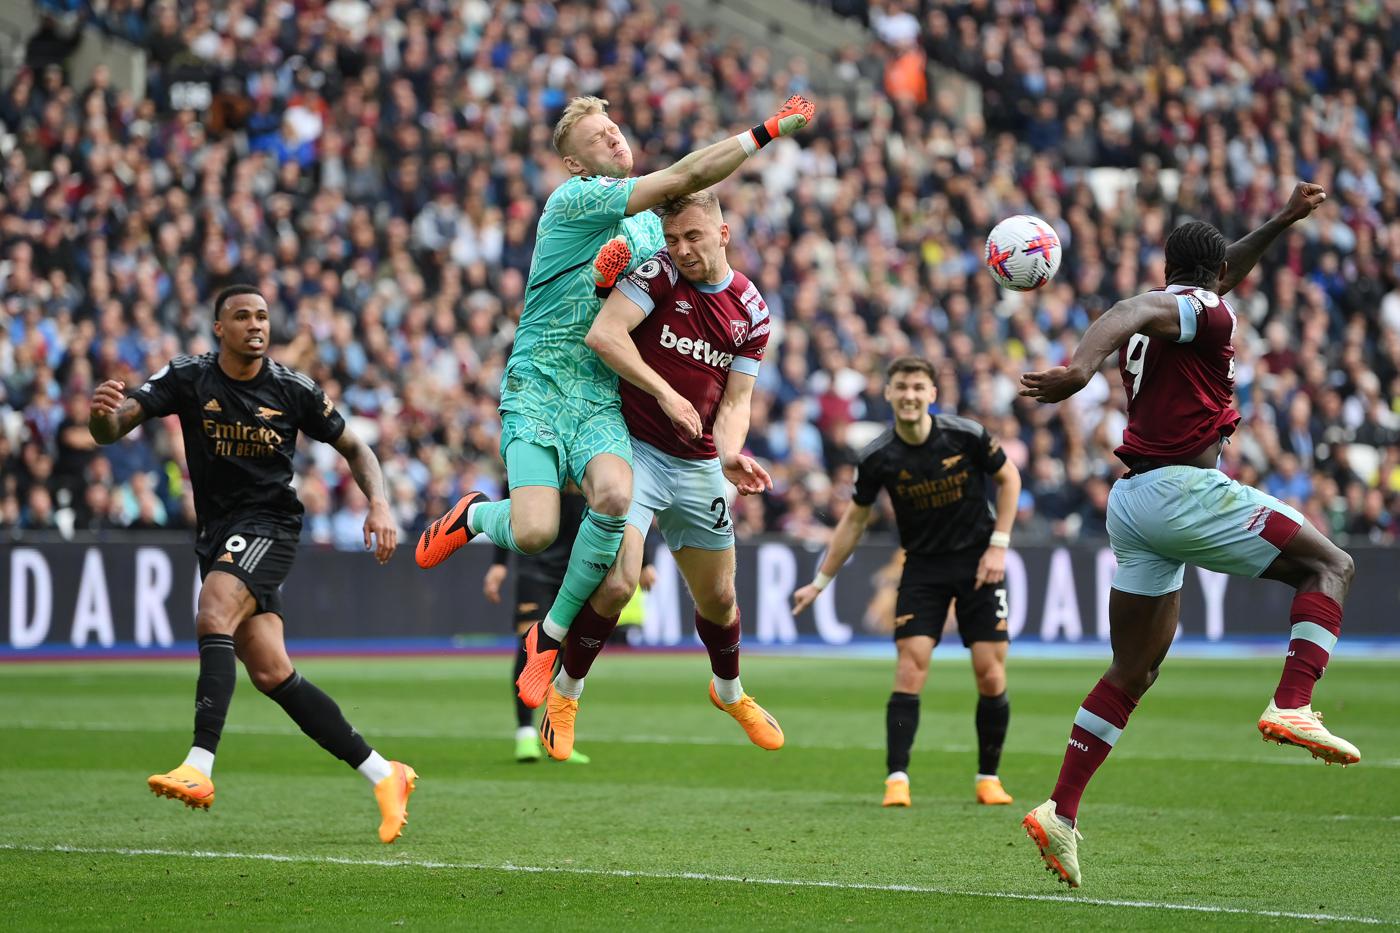 West Ham - Arsenal: where to watch, online broadcast (April 16)